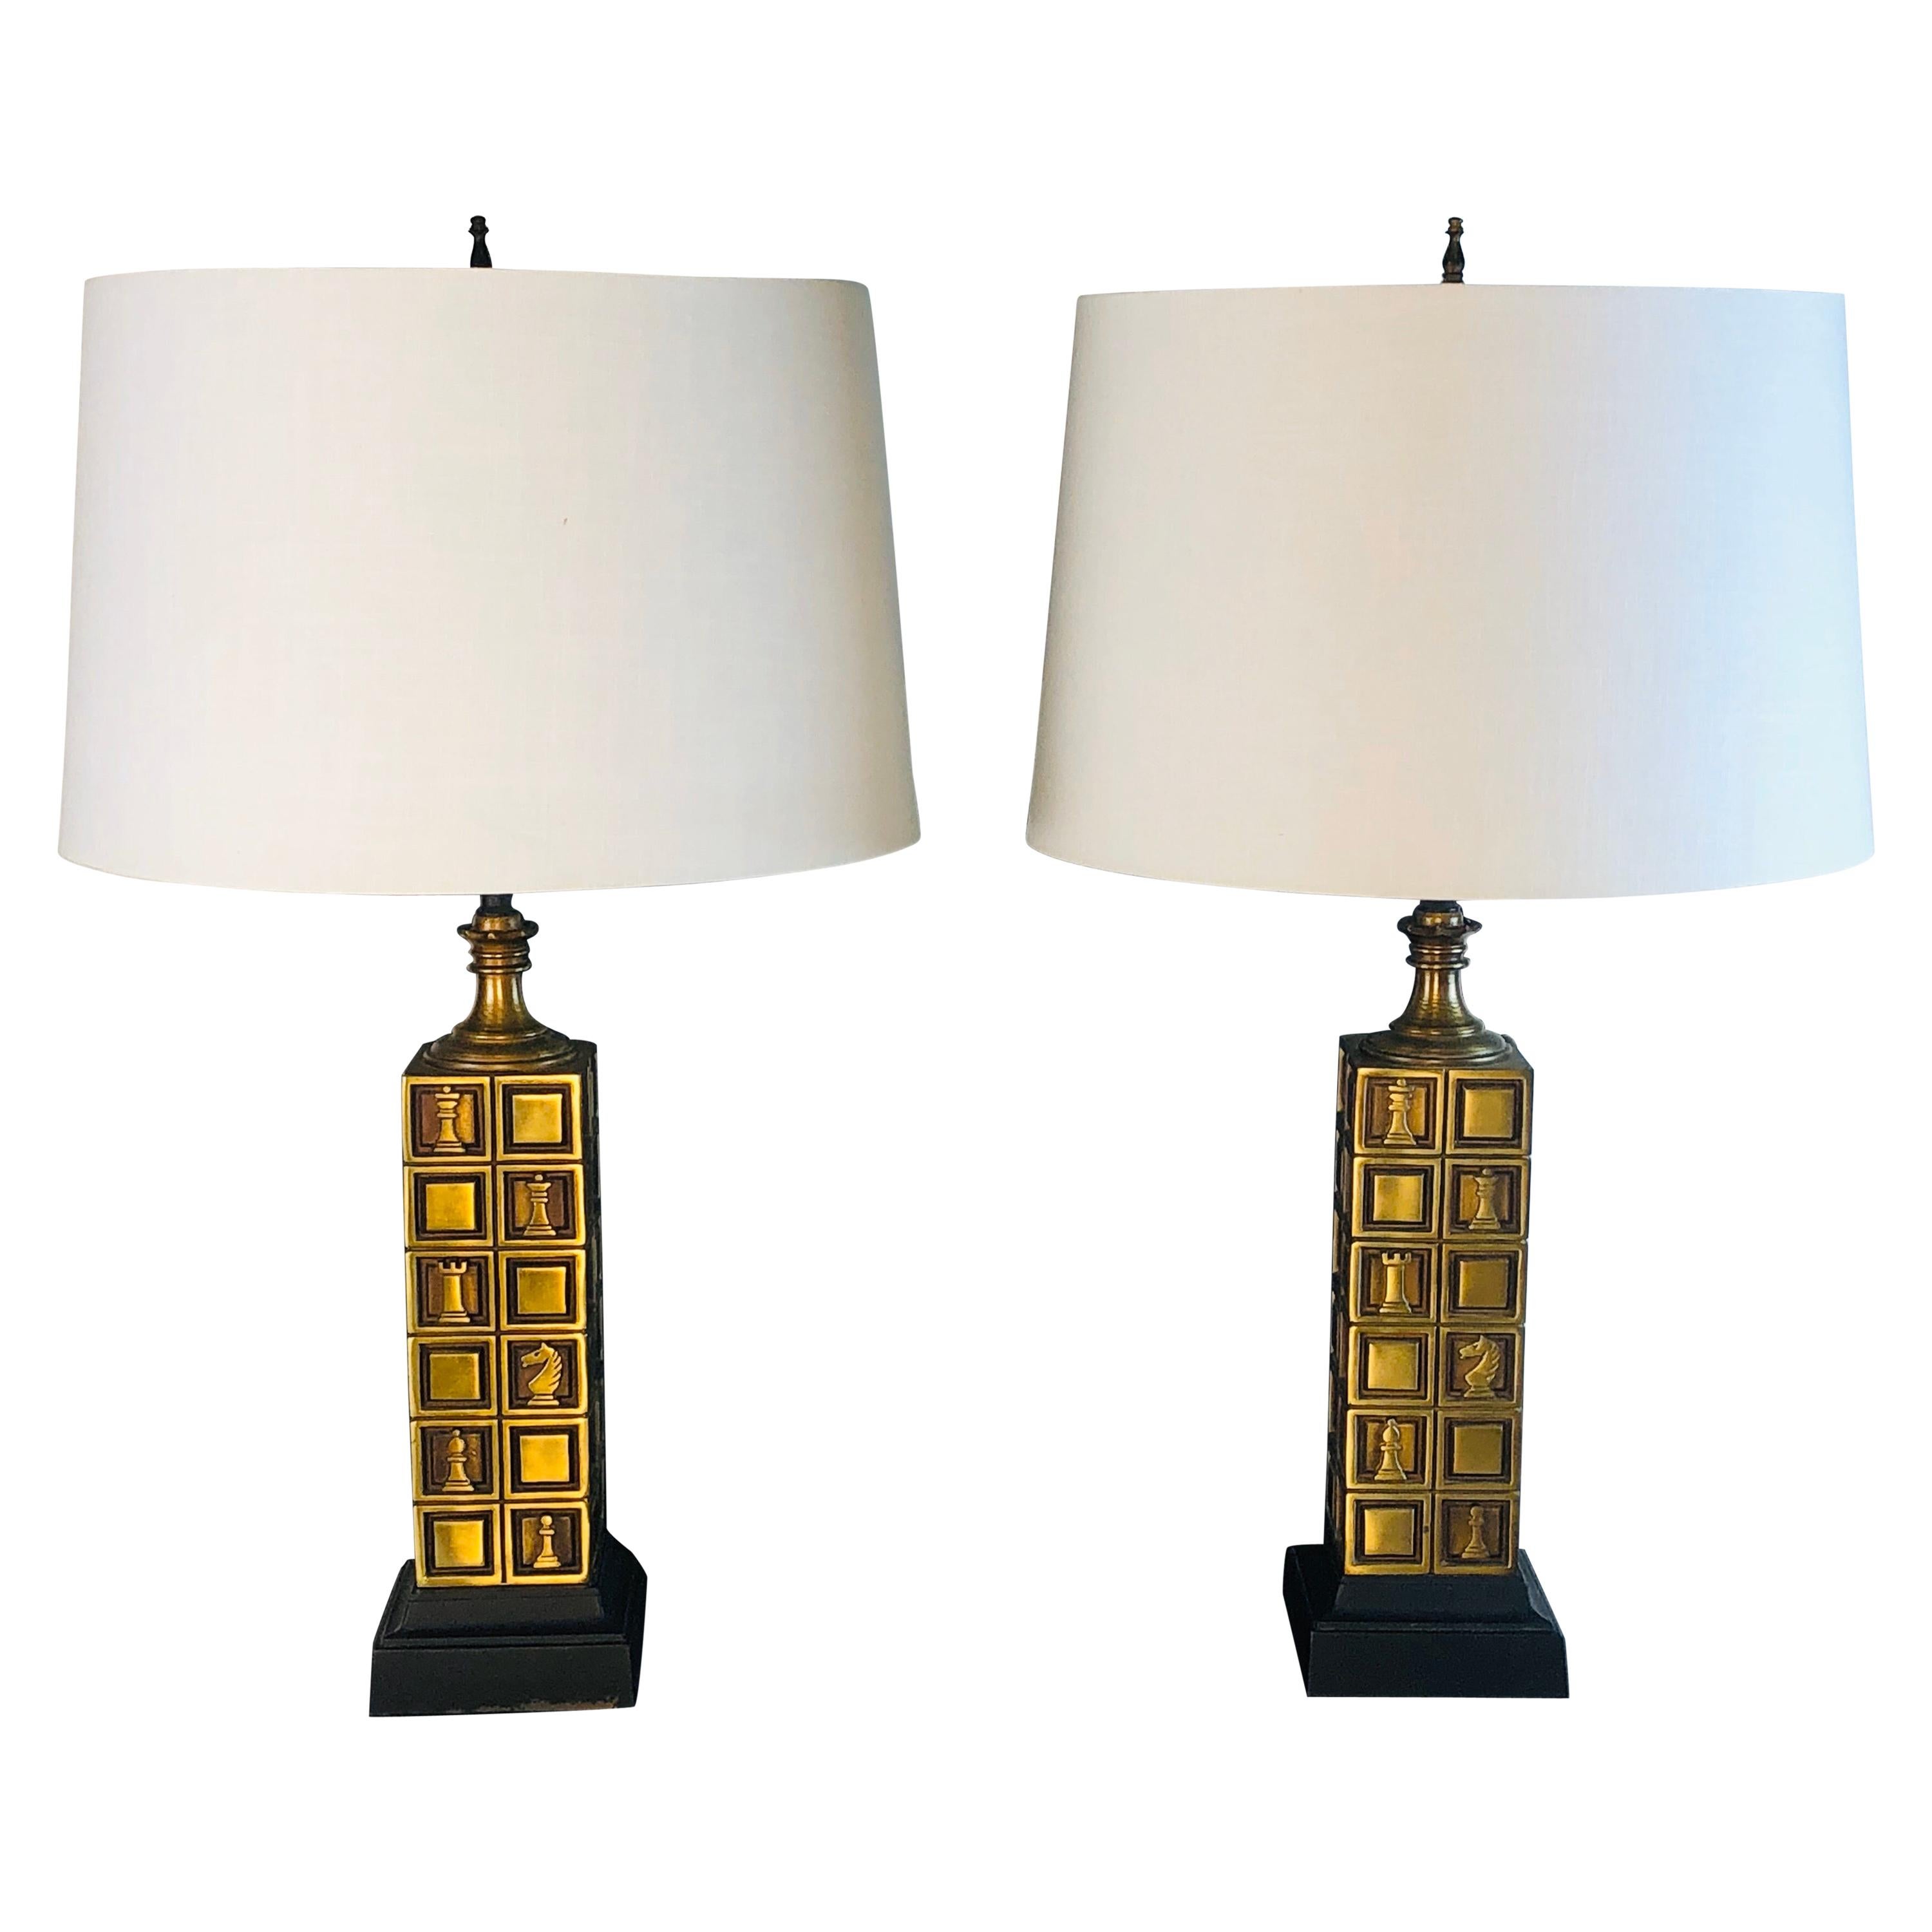 1970s Laurel Lamp Co Brass Chess Table Lamps, Pair For Sale